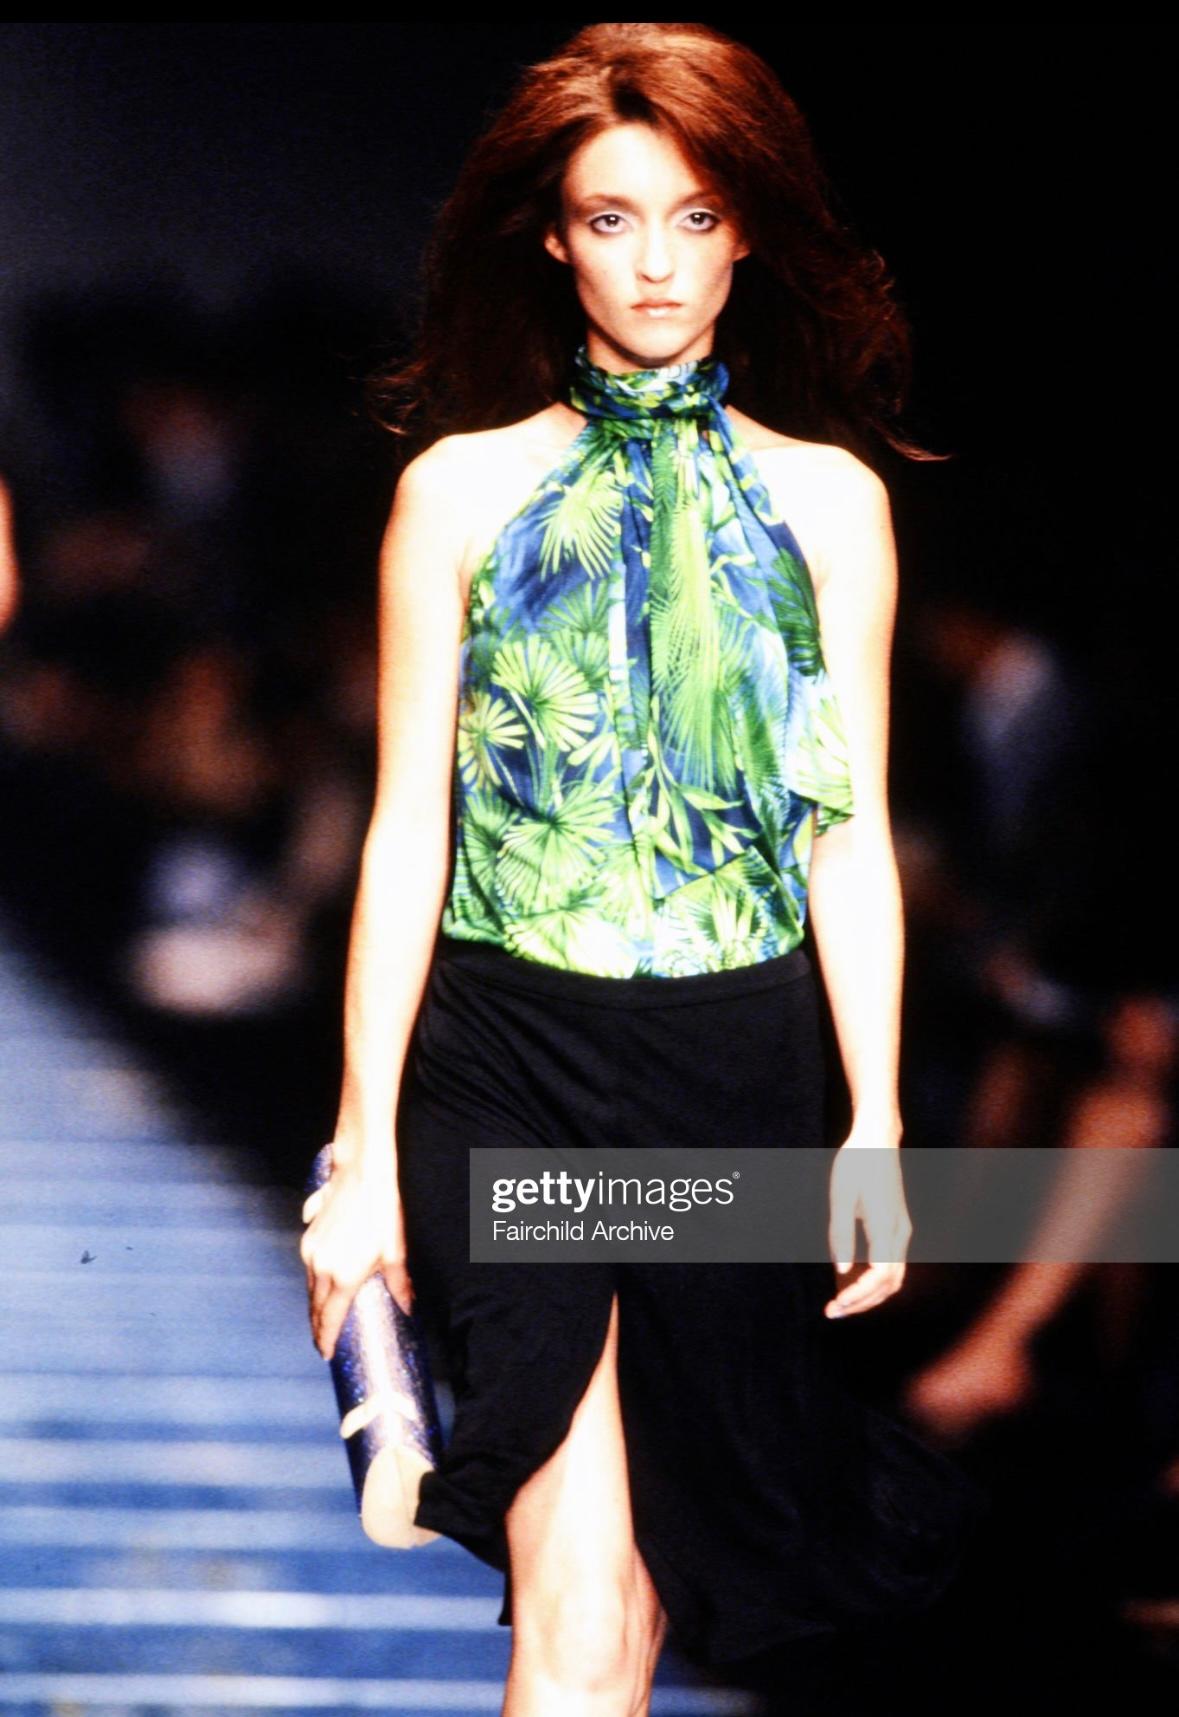 Presenting a fabulous bright green Gianni Versace skirt, designed by Donatella Versace. From the Spring/Summer 2000 collection, this vibrant green skirt features a flared cut and a light slit at the front. A black version debuted on the runway as